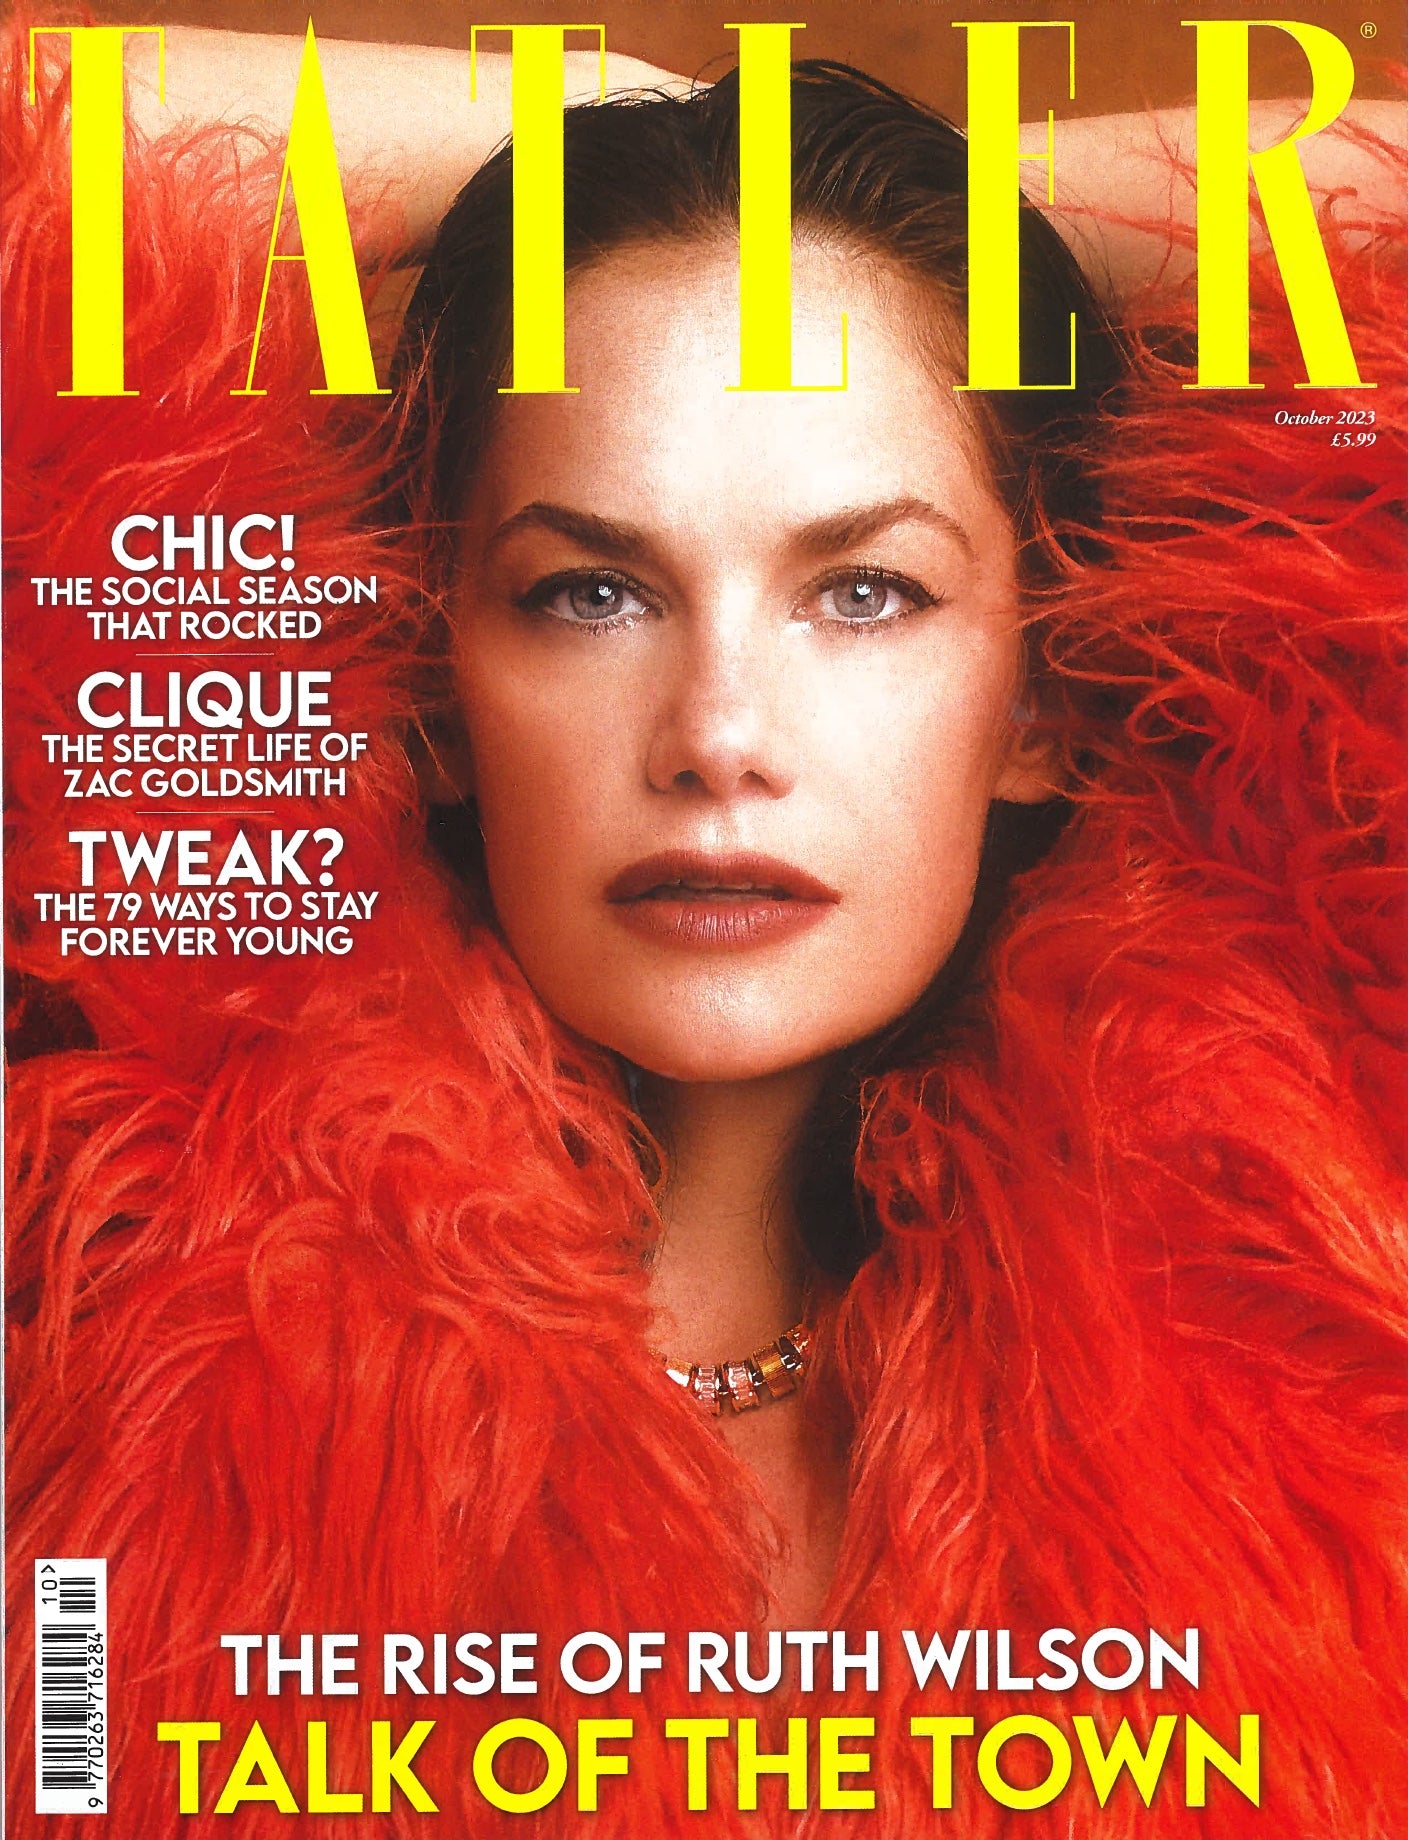 Royal Revelations: Inside the Exclusive World of Tatler's October Issue, Beauty Edition